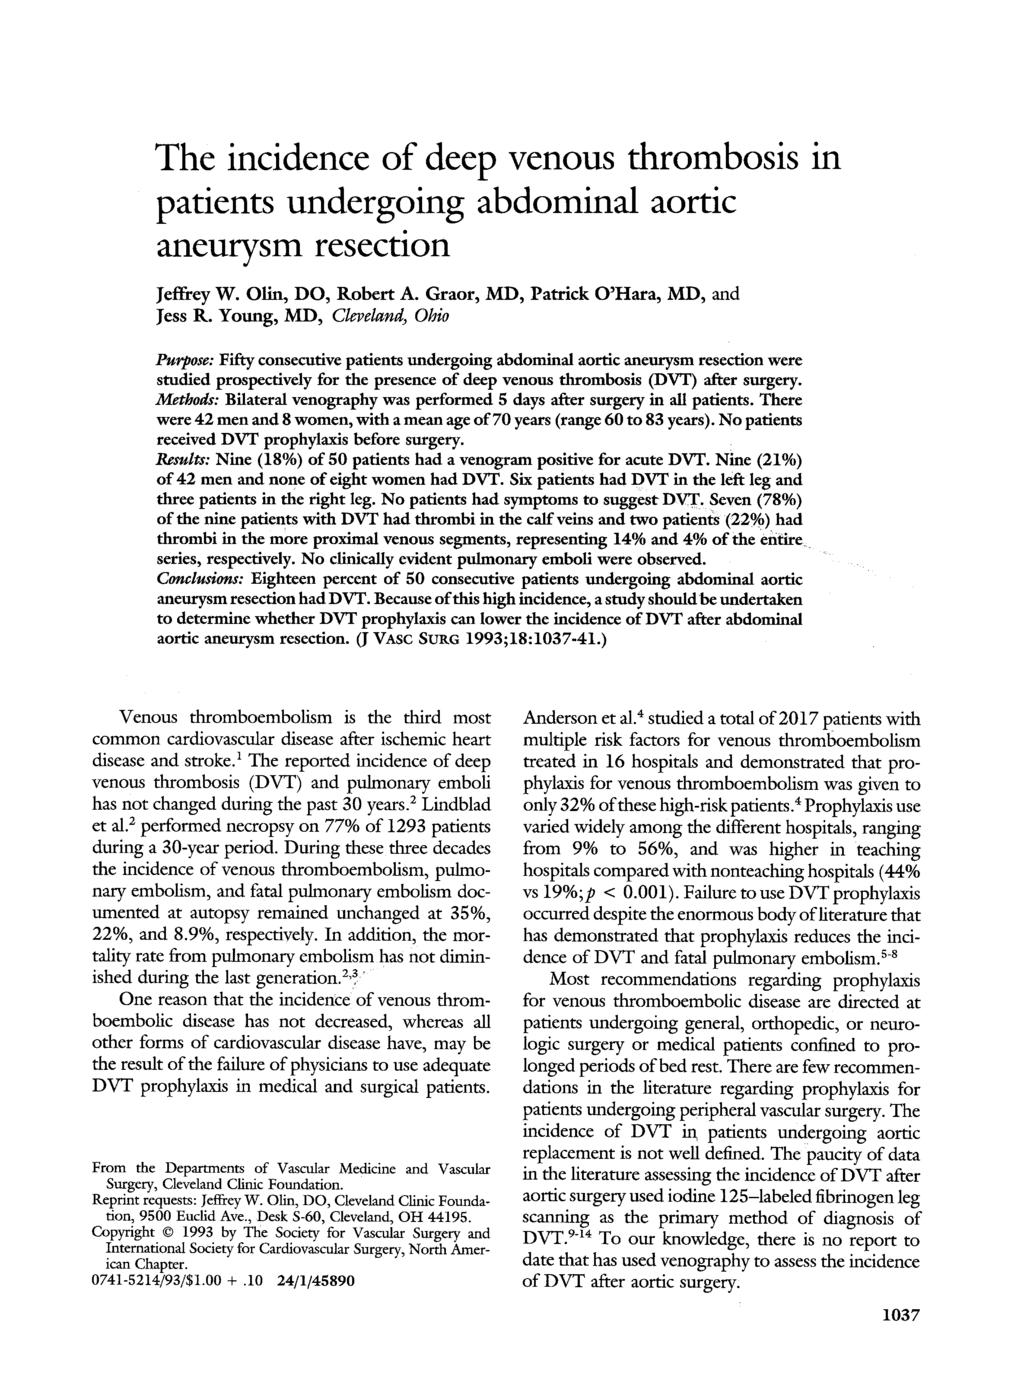 The incidence of deep venous thrombosis patients undergoing abdominal aortic aneurysm resection in Jeffrey W. Olin, DO, Robert A. Graor, MD, Patrick O'Hara, MD, and Jess R.